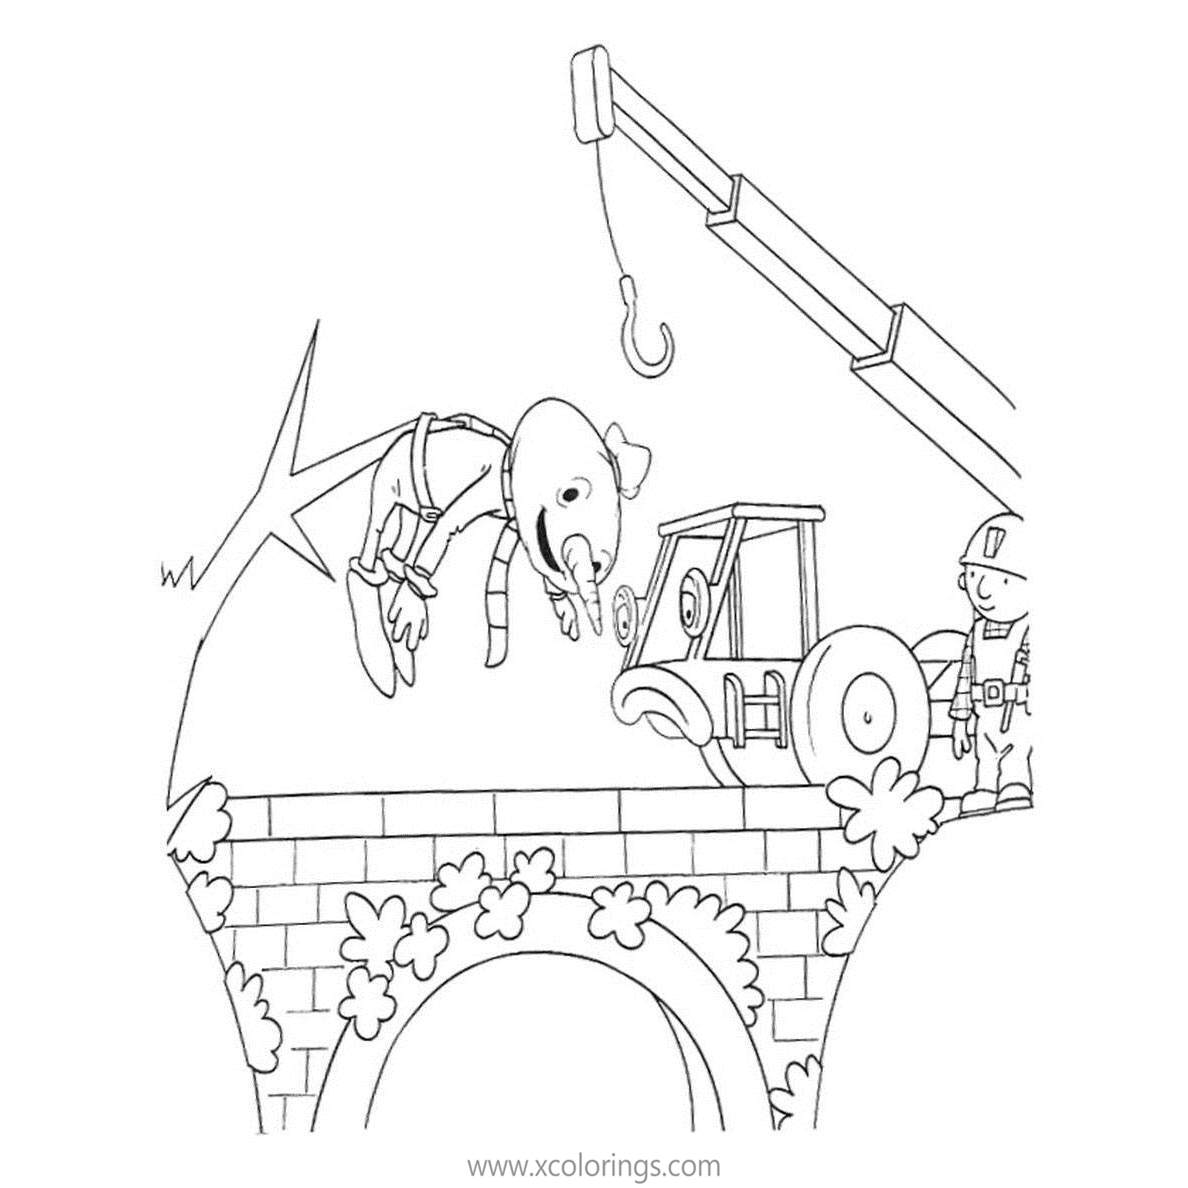 Free Bob The Builder Coloring Pages Lofty is Trying to Save Spud printable